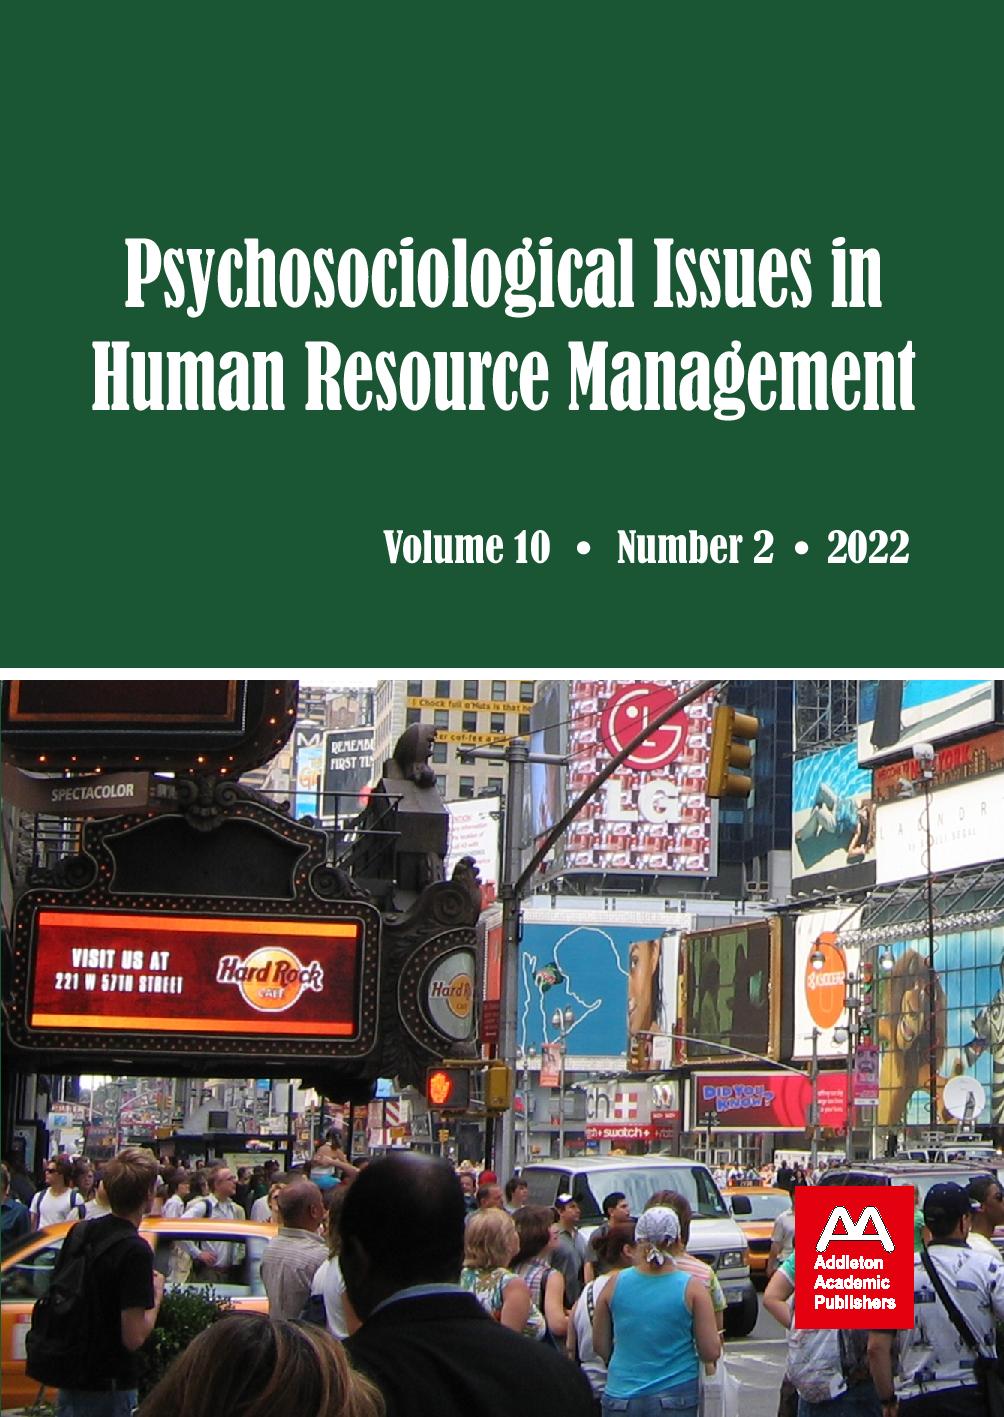 Virtual Human Resource Management, Workplace Tracking and Algorithmic Monitoring Systems, and Cognitive and Affective Metrics in the Immersive Metaverse Environment Cover Image